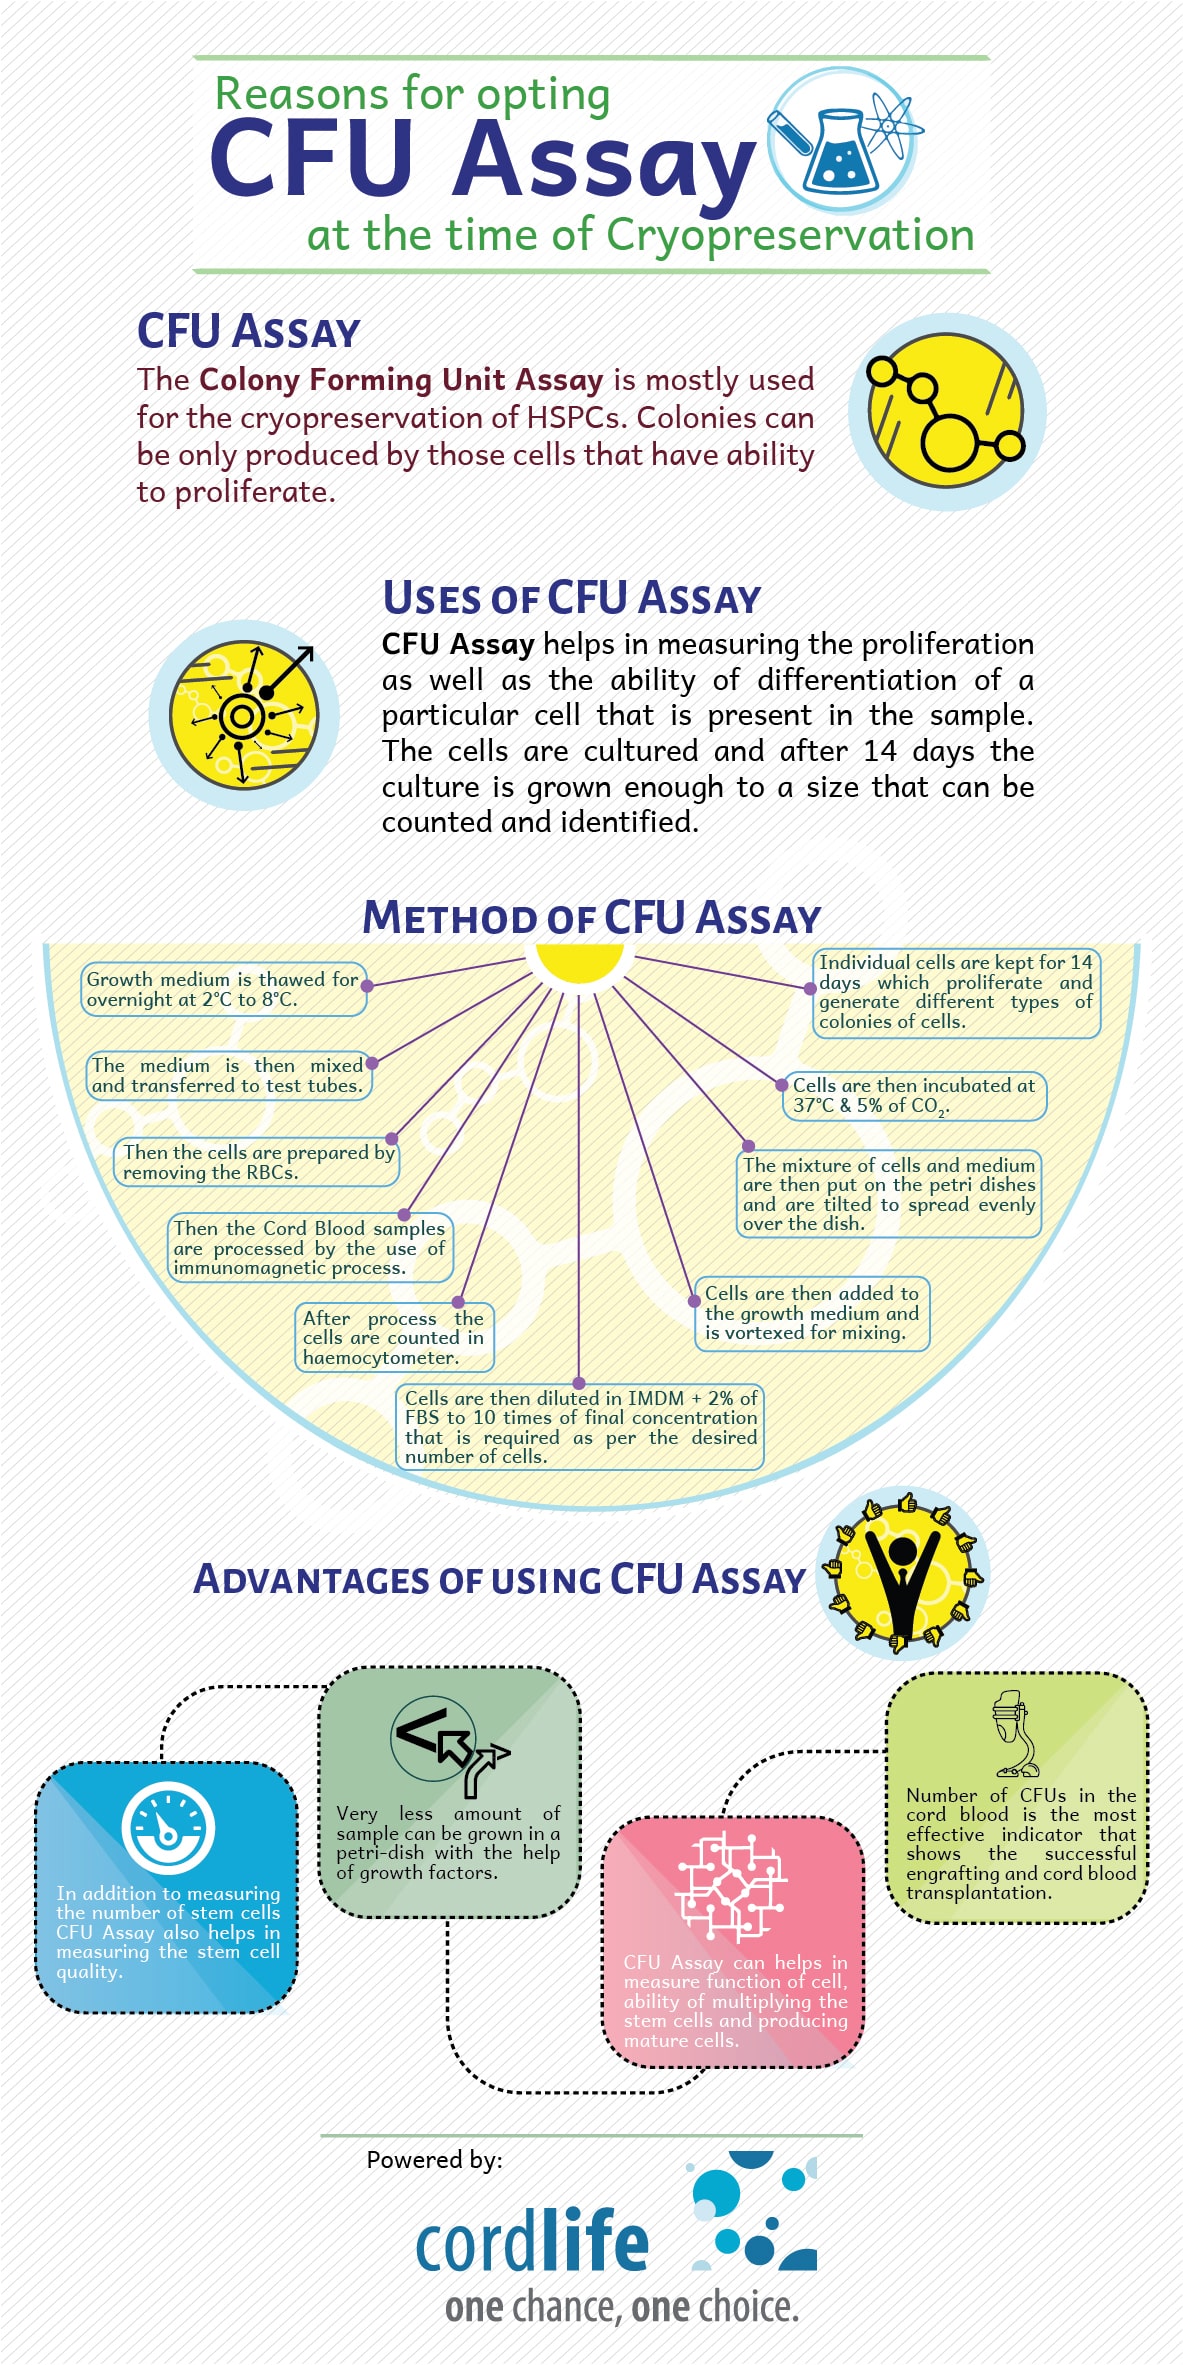 Reasons for opting CFU assay at the time of cryopreservation